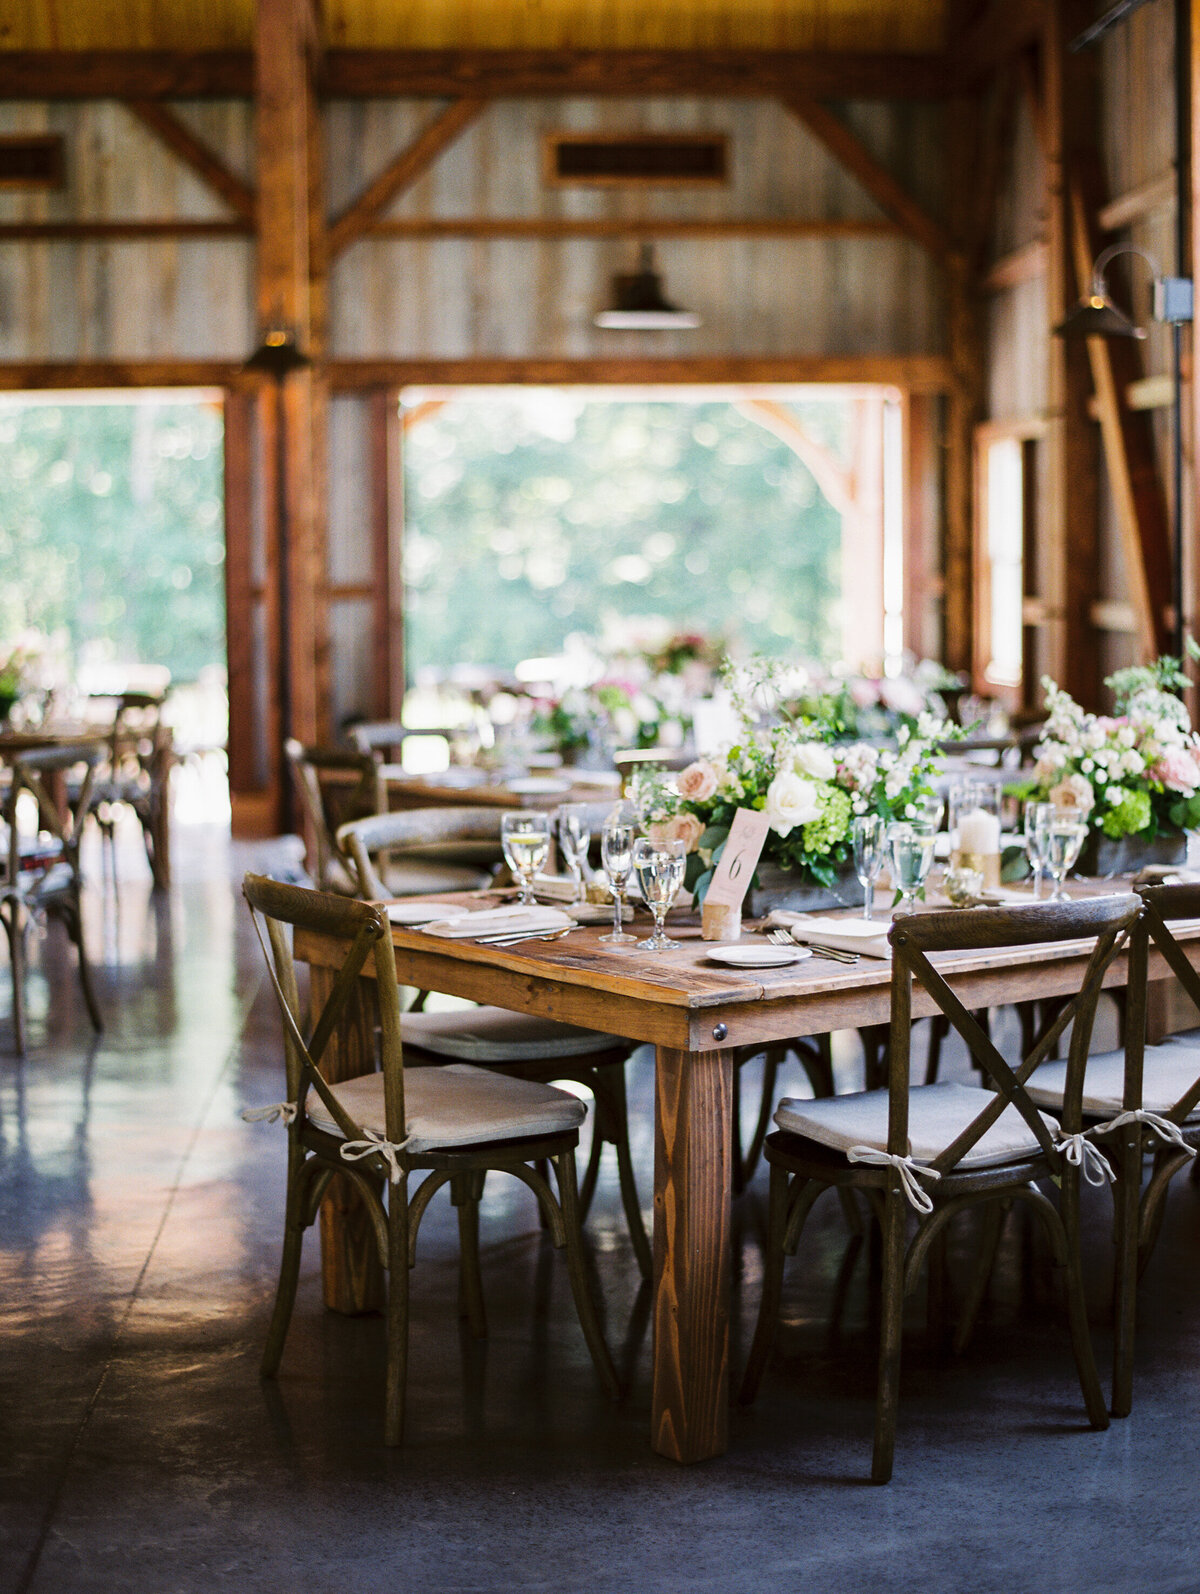 Wooden tables and chairs decorated with floral centerpieces